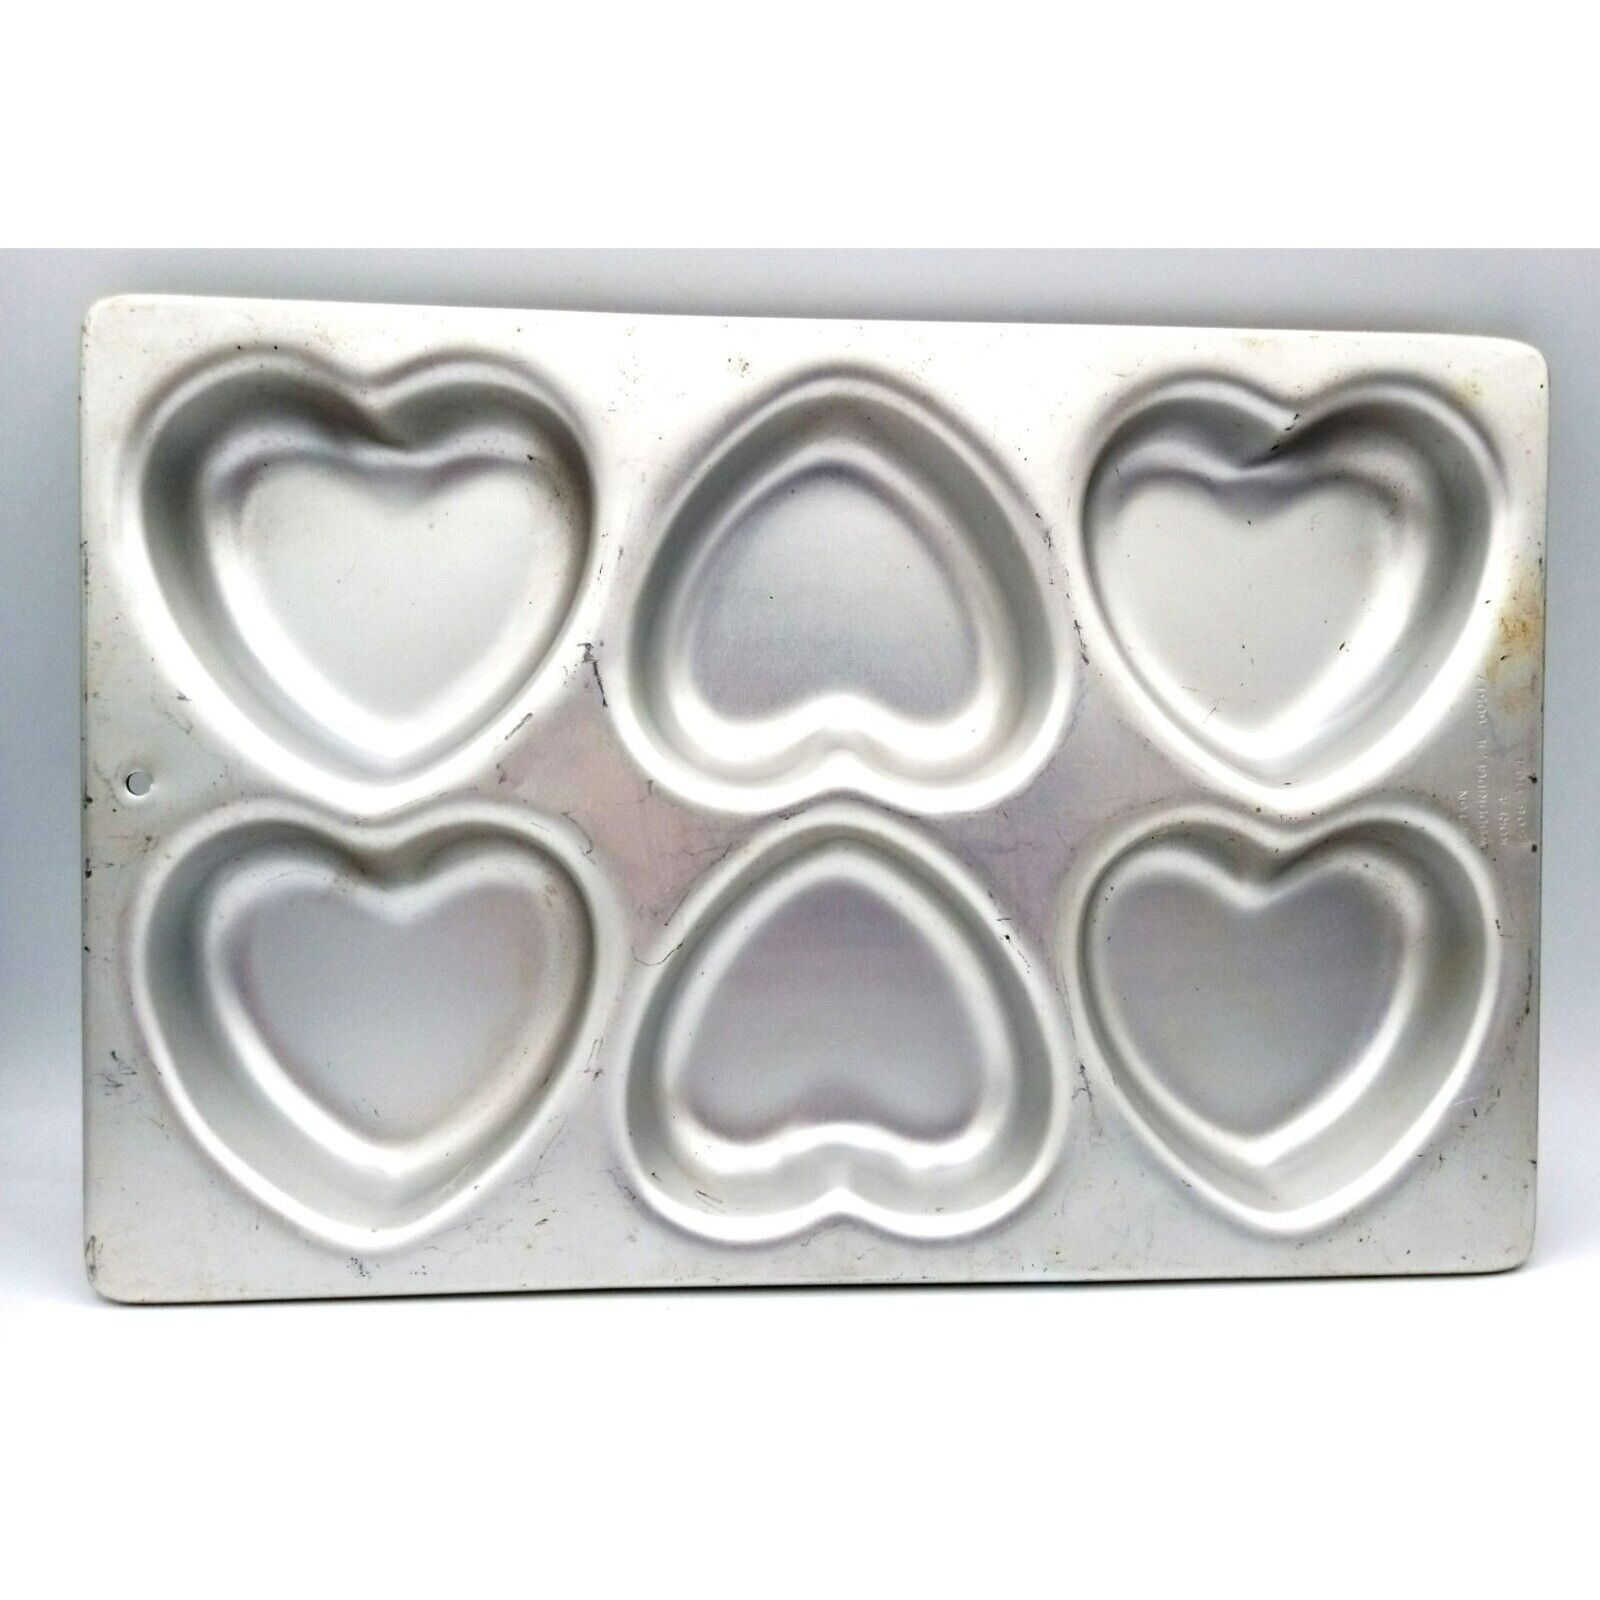 Wilton Heart Cake Candy Cookie Baking Mold Metal Tray #508-1104 Valentine Day